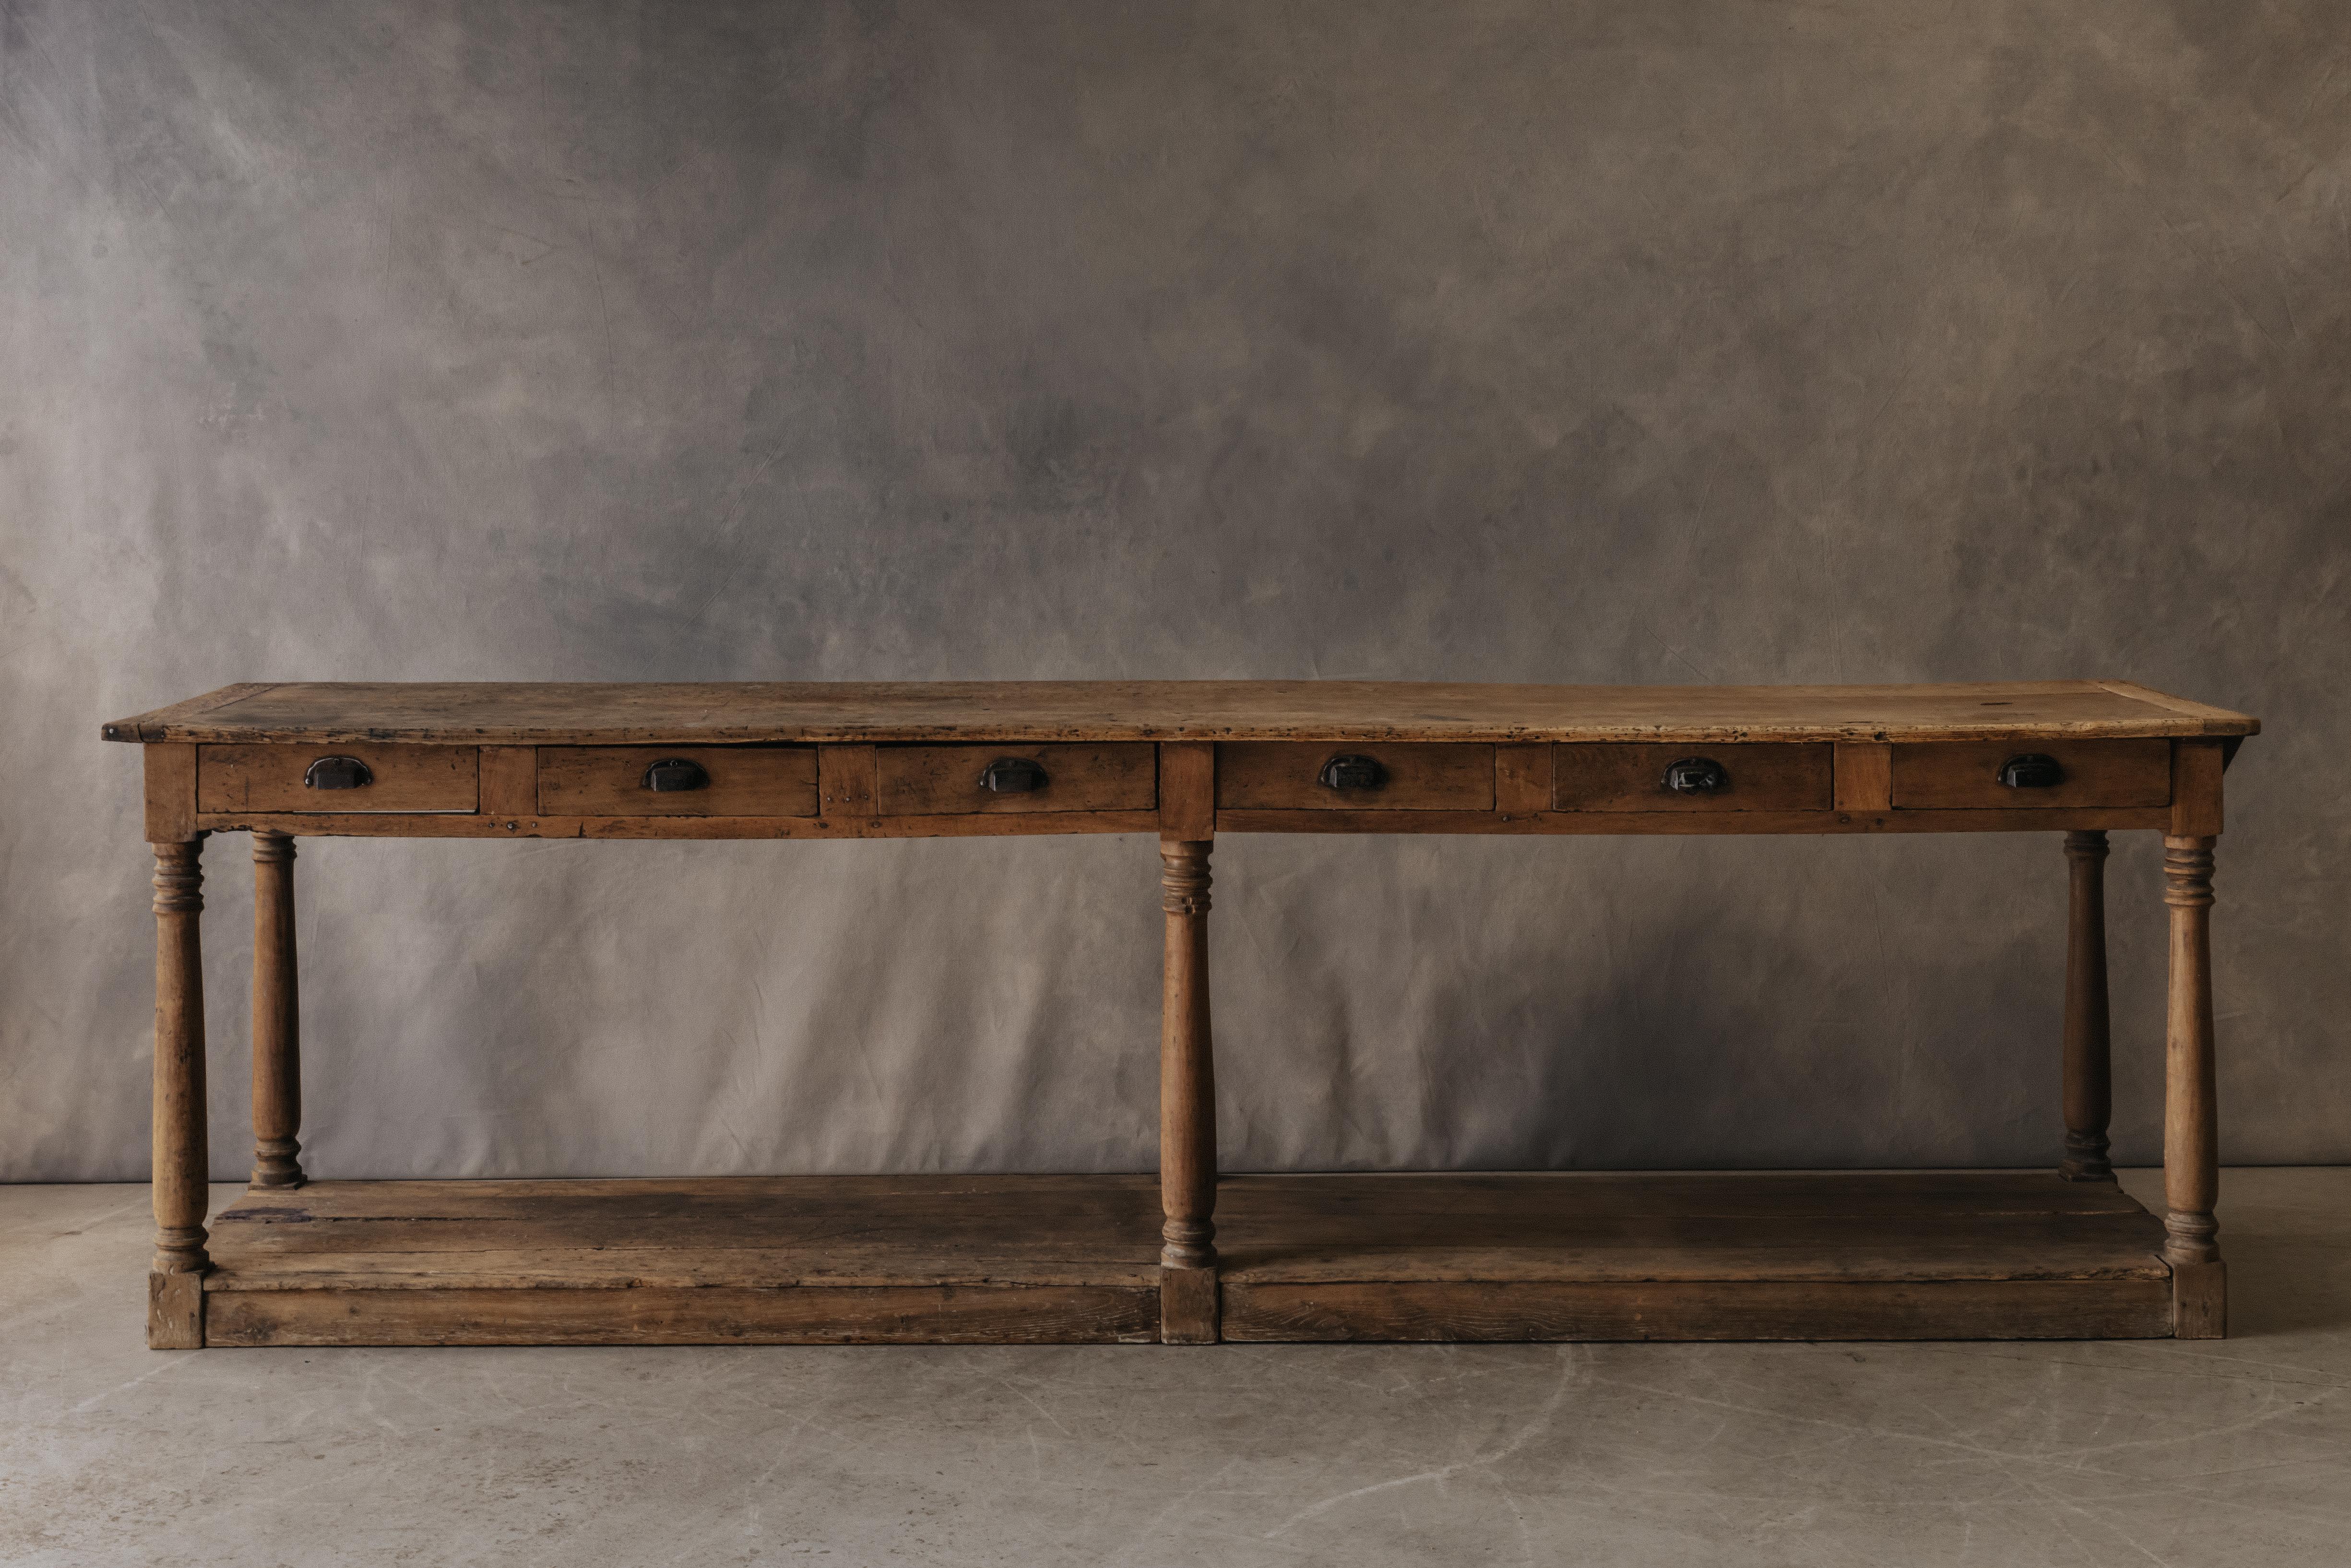 Early Draper Console Table From France, Circa 1940.  Solid oak construction with superb original patina and wear.  